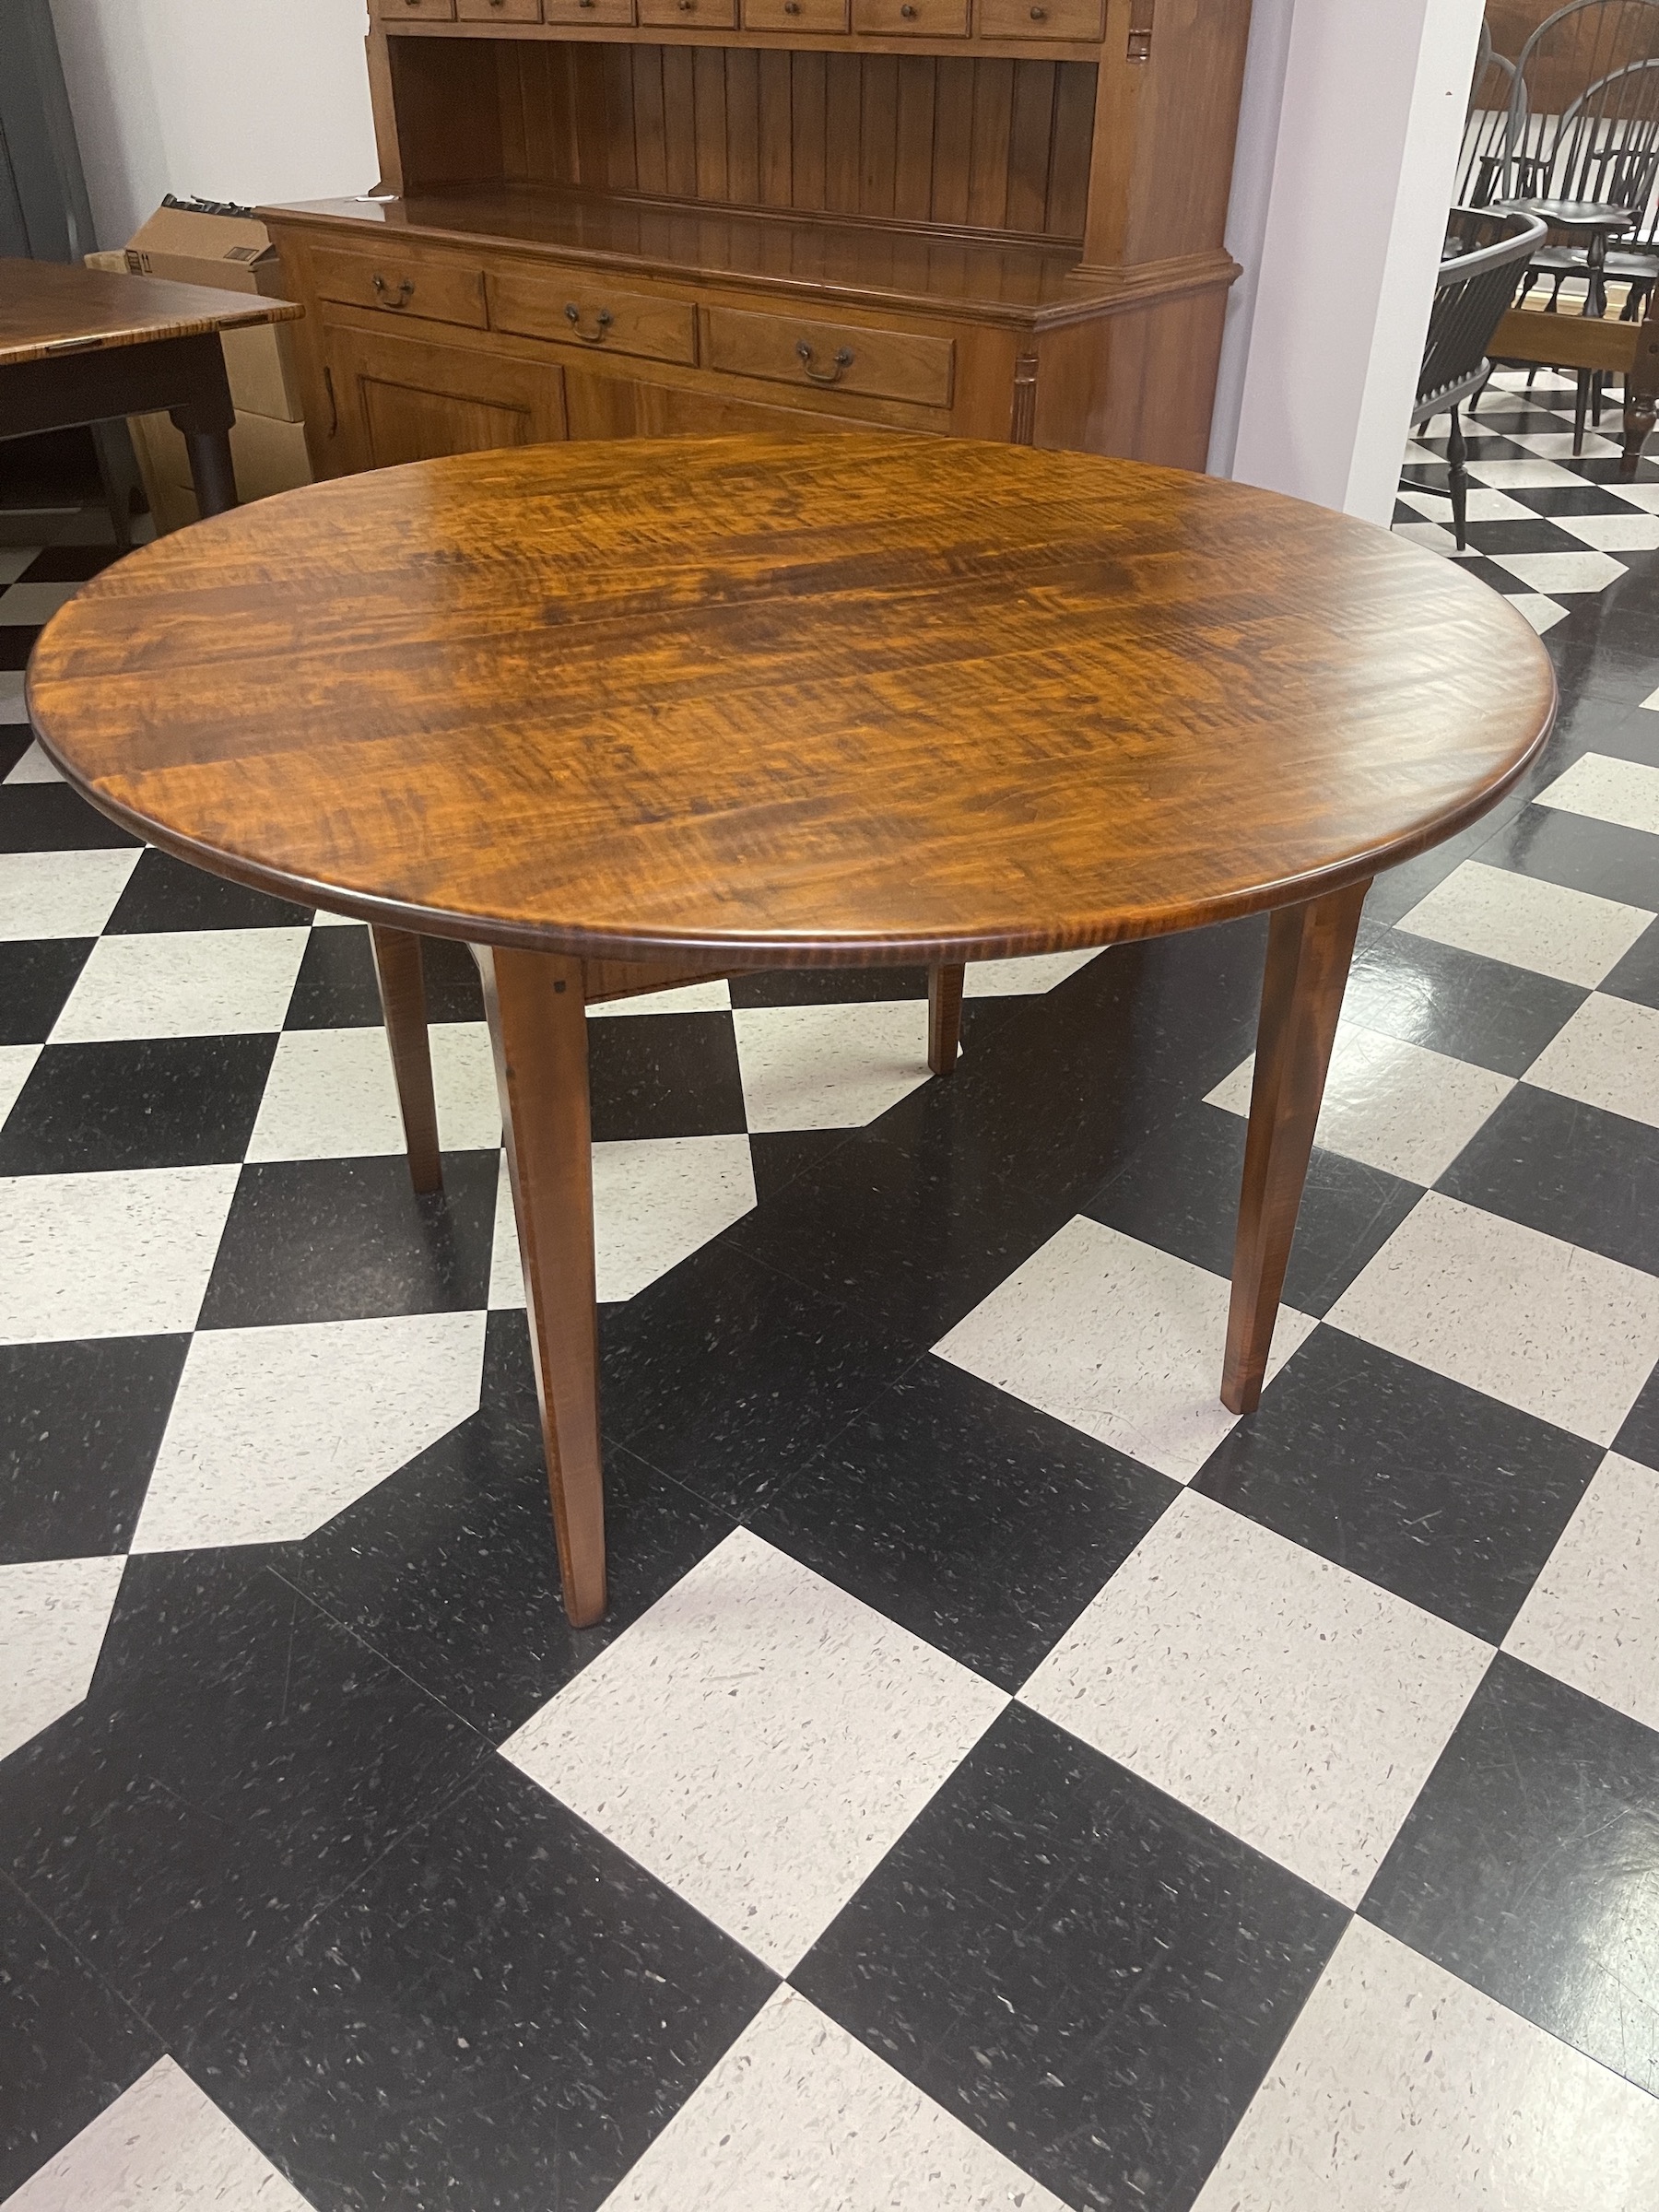 48in Round Shaker Style Table Image